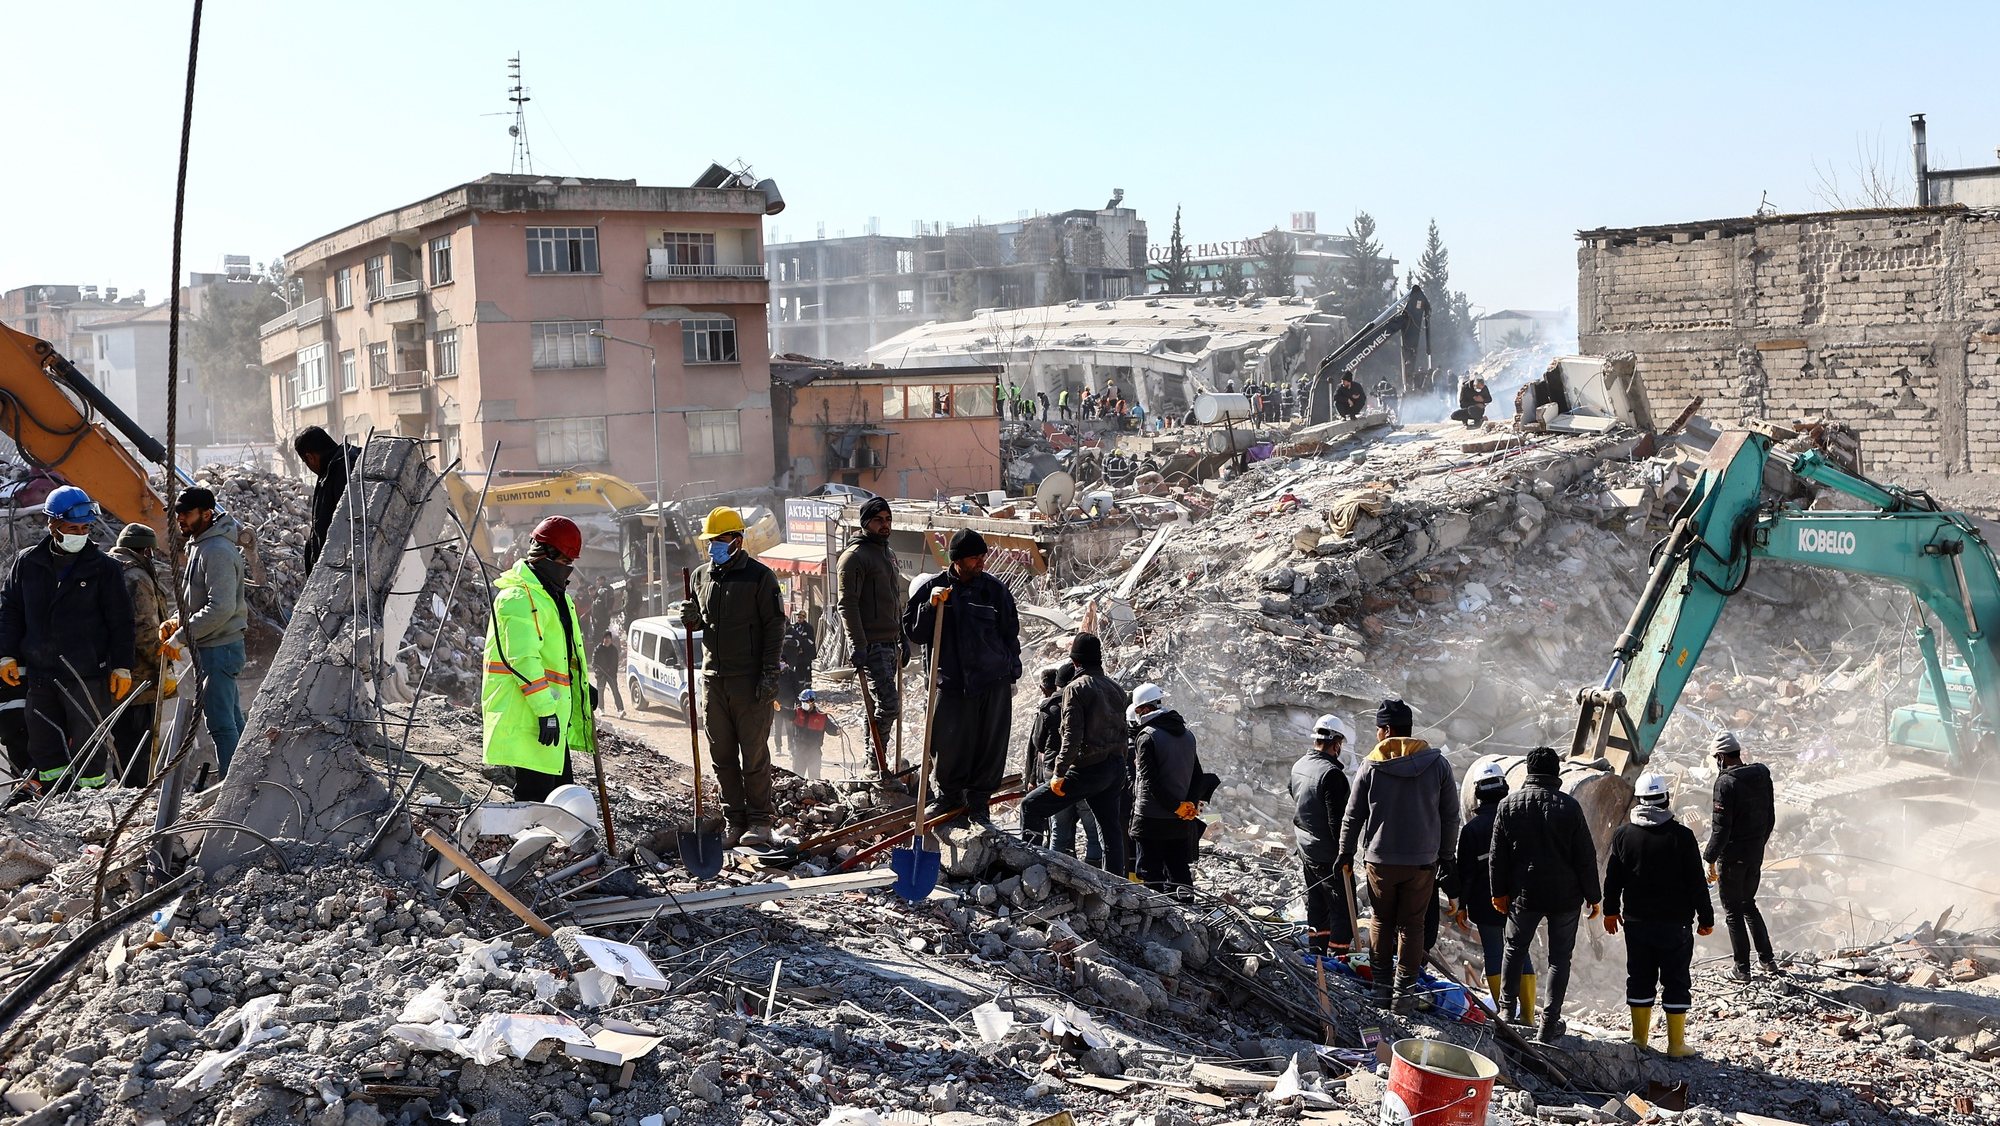 epa10460820 Emergency personnel and local people work at the site of collapsed buildings following a powerful earthquake in Adiyaman, Turkey, 11 February 2023. More than 24,000 people have died and thousands more are injured after two major earthquakes struck southern Turkey and northern Syria on 06 February. Authorities fear the death toll will keep climbing as rescuers look for survivors across the region.  EPA/SEDAT SUNA